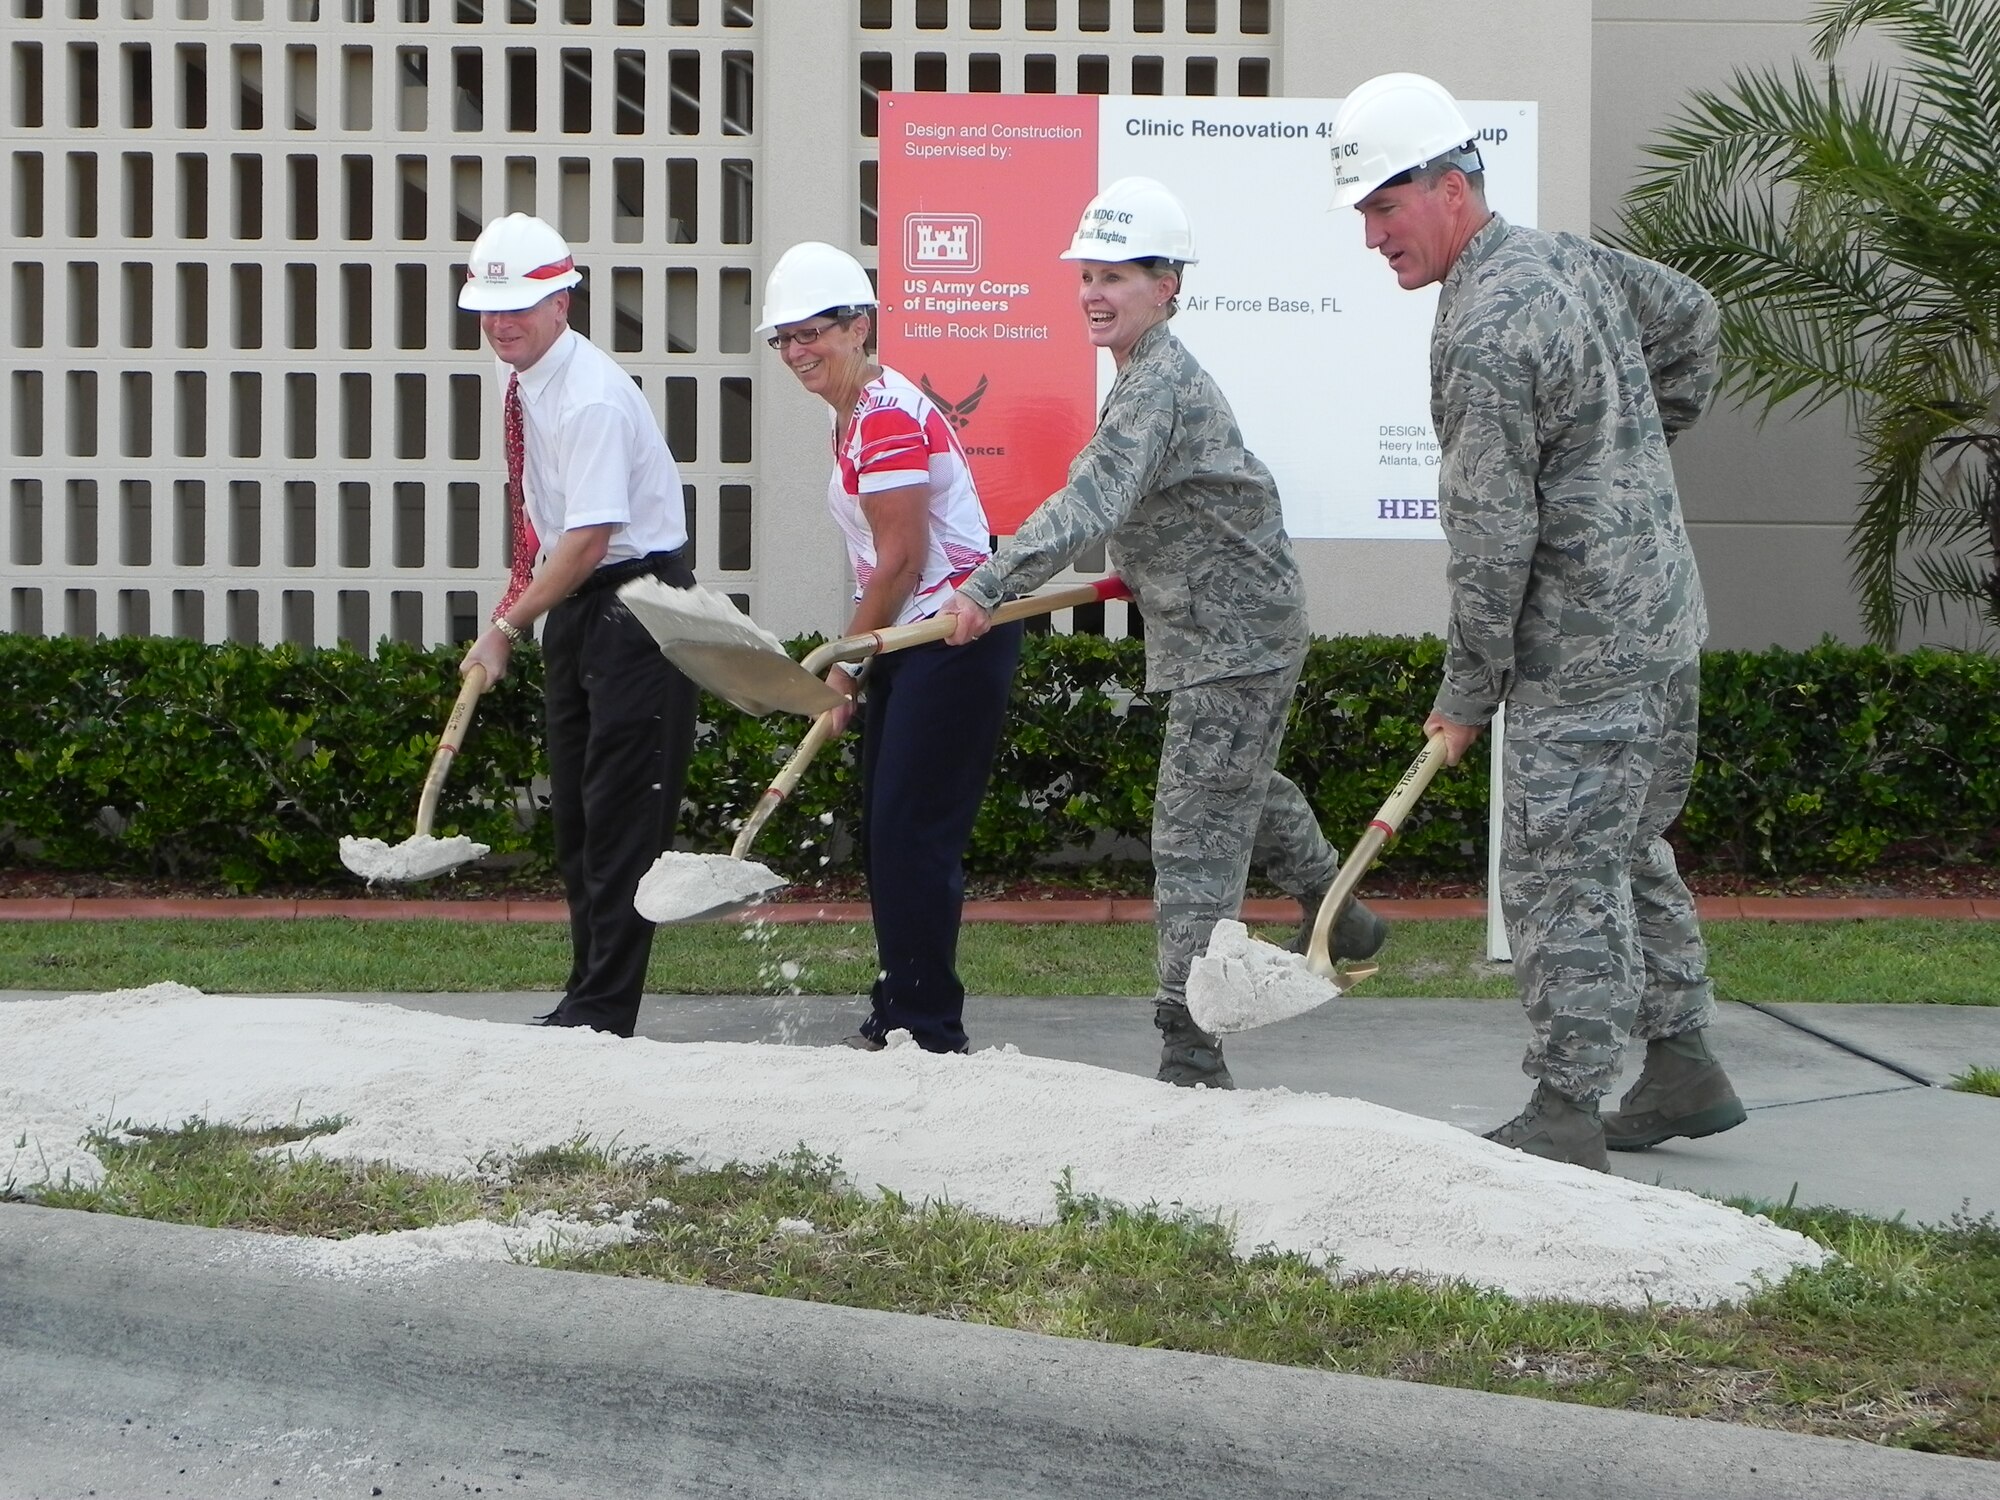 Col. Corinne Naughton, 45th SW Medical Group commander (second from right), excitedly tossed the very first shovel of dirt during the Groundbreaking Ceremony held to kickoff the new $18.5M clinic renovations.   “These new renovations will transform the Patrick Air Force Base Medical Group facilities into a state of the art outpatient clinic to be utilized by joint active duty and reserve servicemembers, the Space Coast’s vast military retiree population, and their families,” said Col. Naughton.  “Currently, our clinic handles well over 60,000 patient visits each year and these renovations will certainly enhance the already stellar care provided to our patients by our medics.”